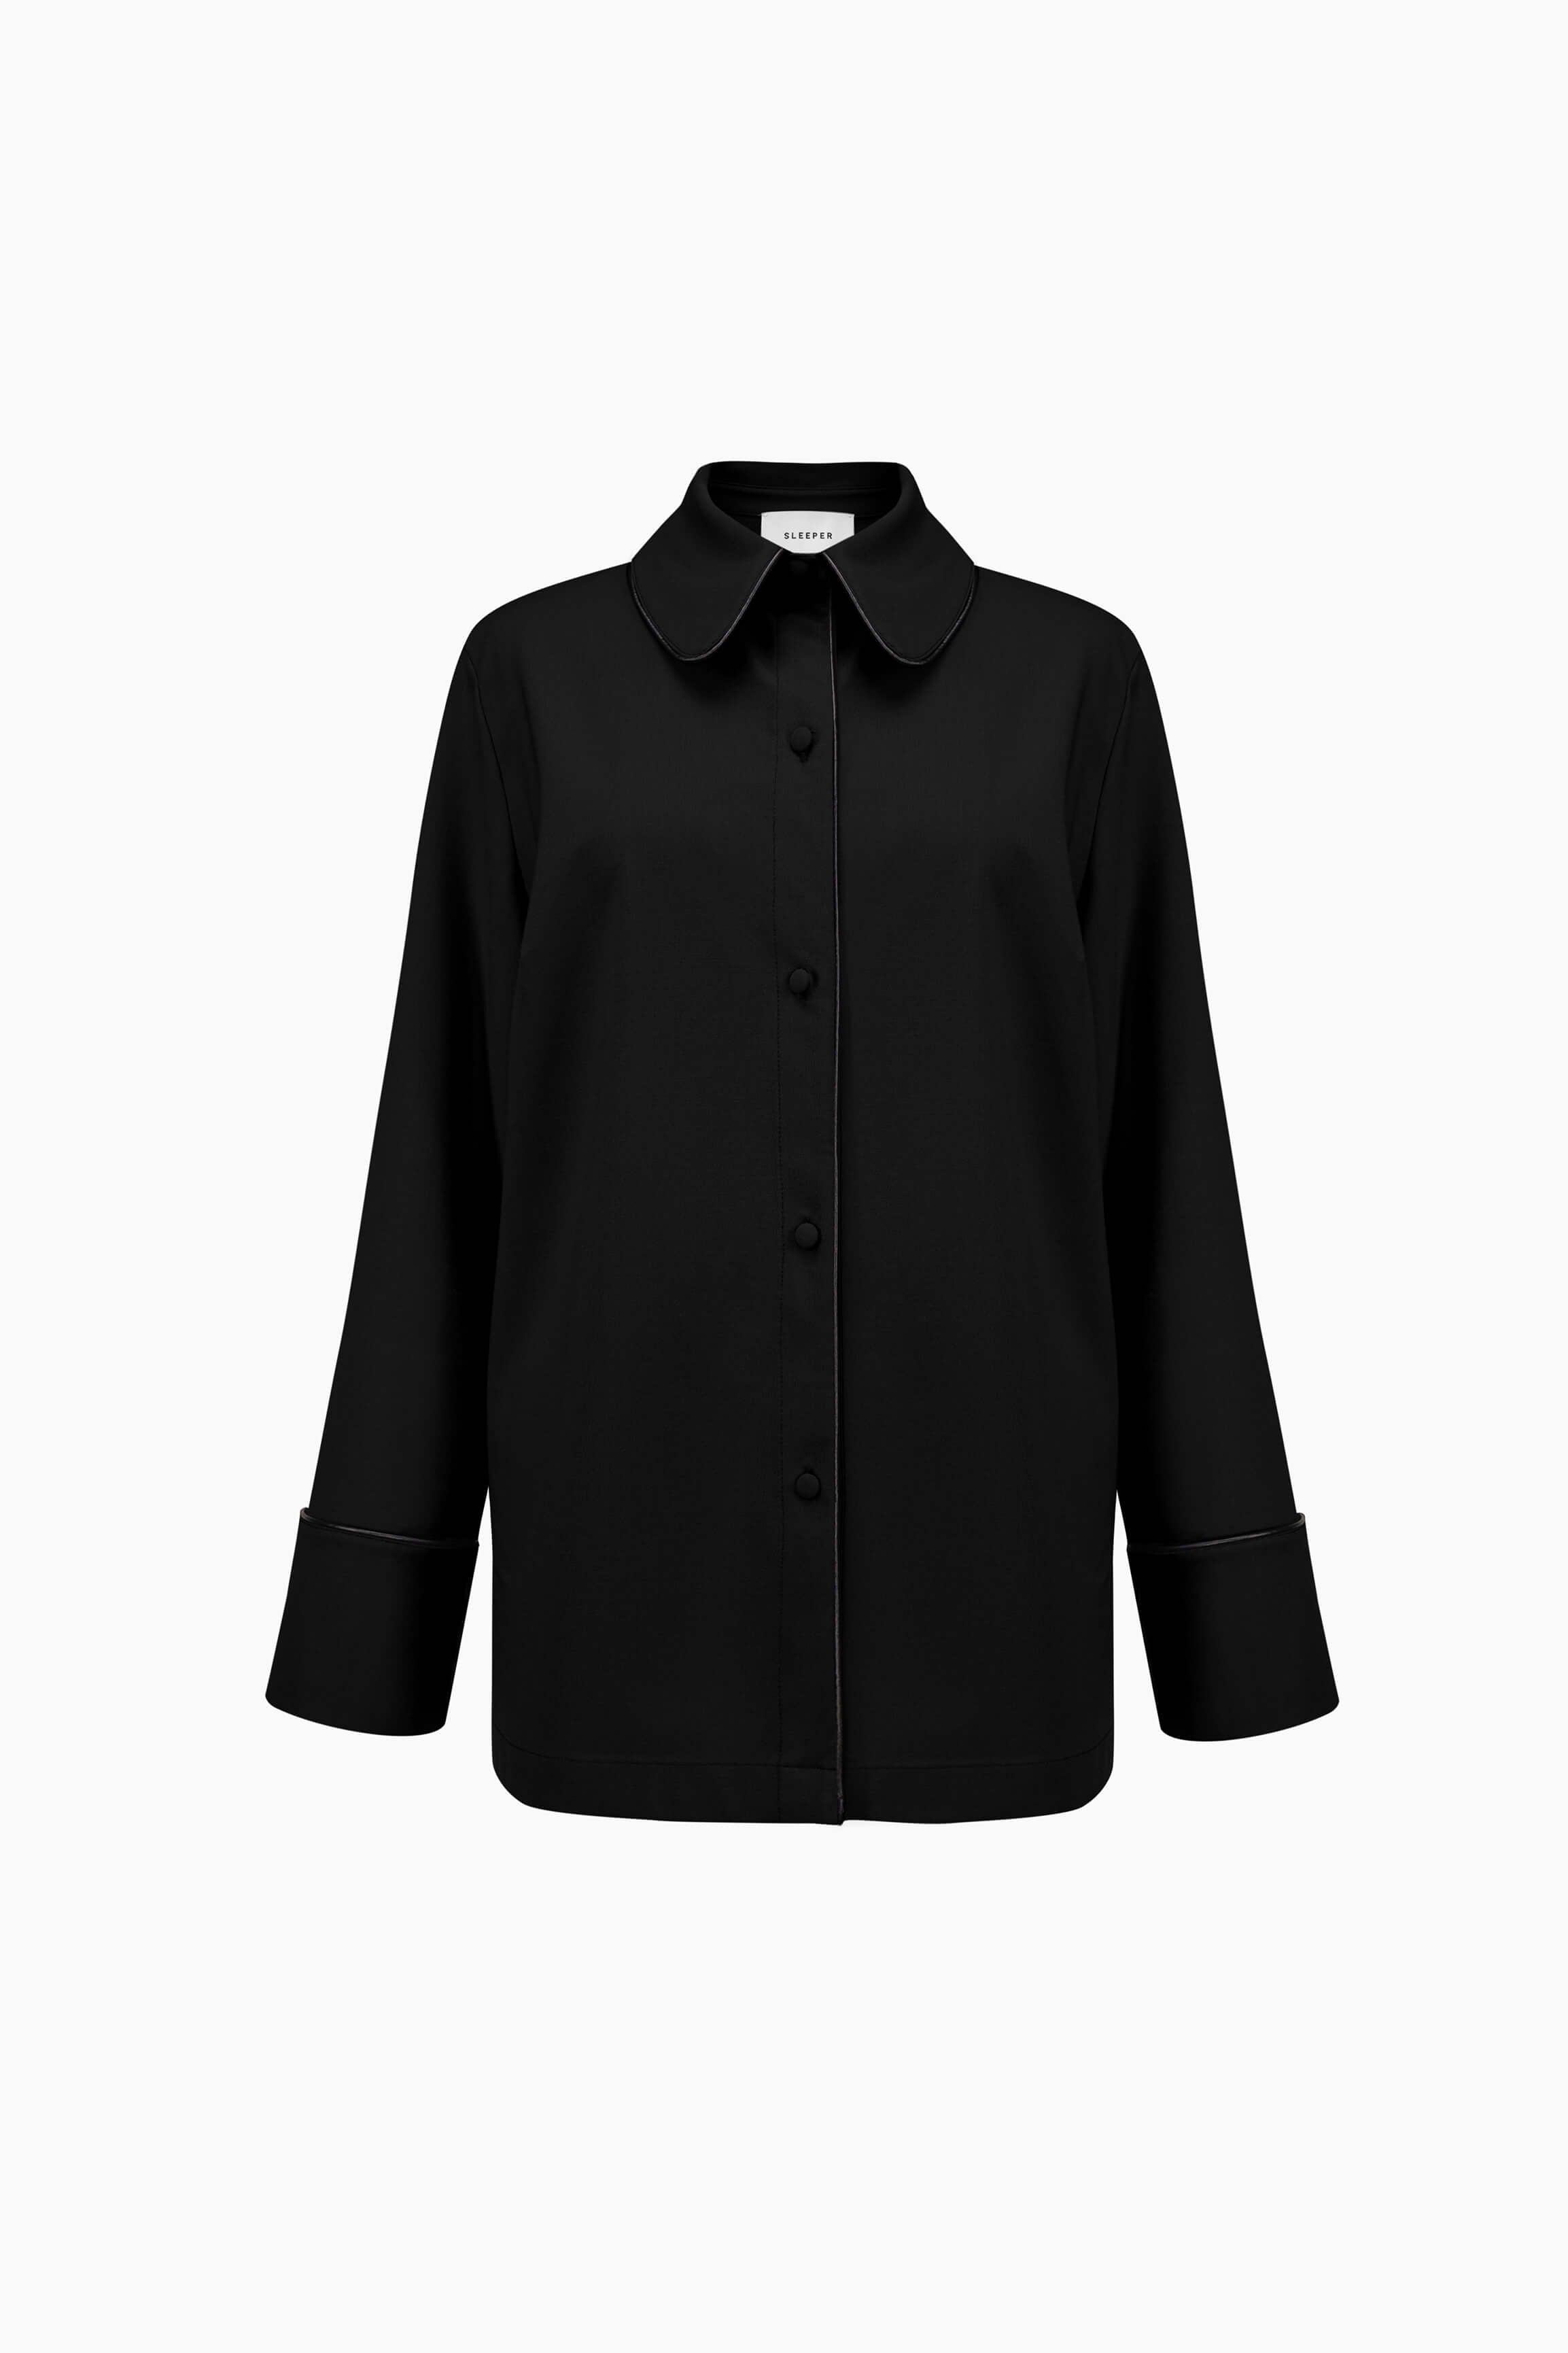 Off Duty Shirt with Piping in Black – Sleeper